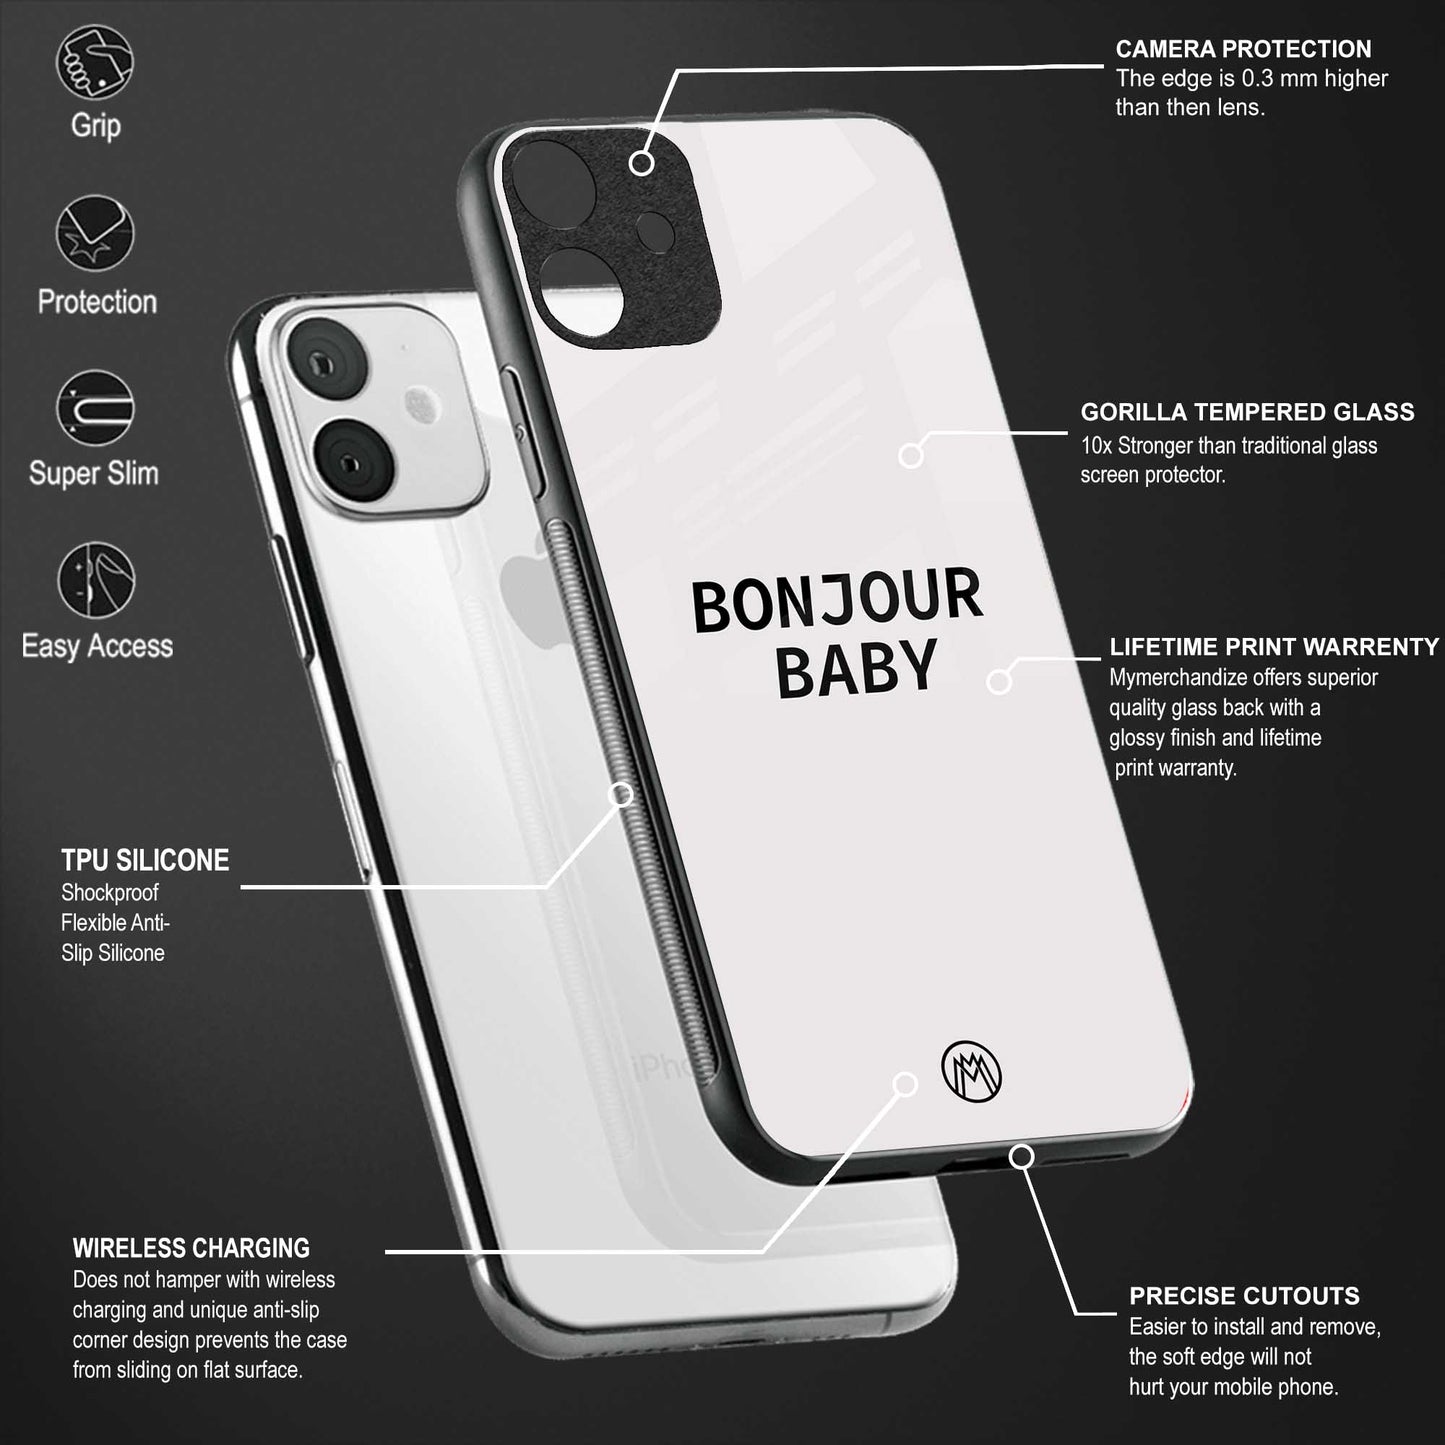 bonjour baby back phone cover | glass case for vivo y73